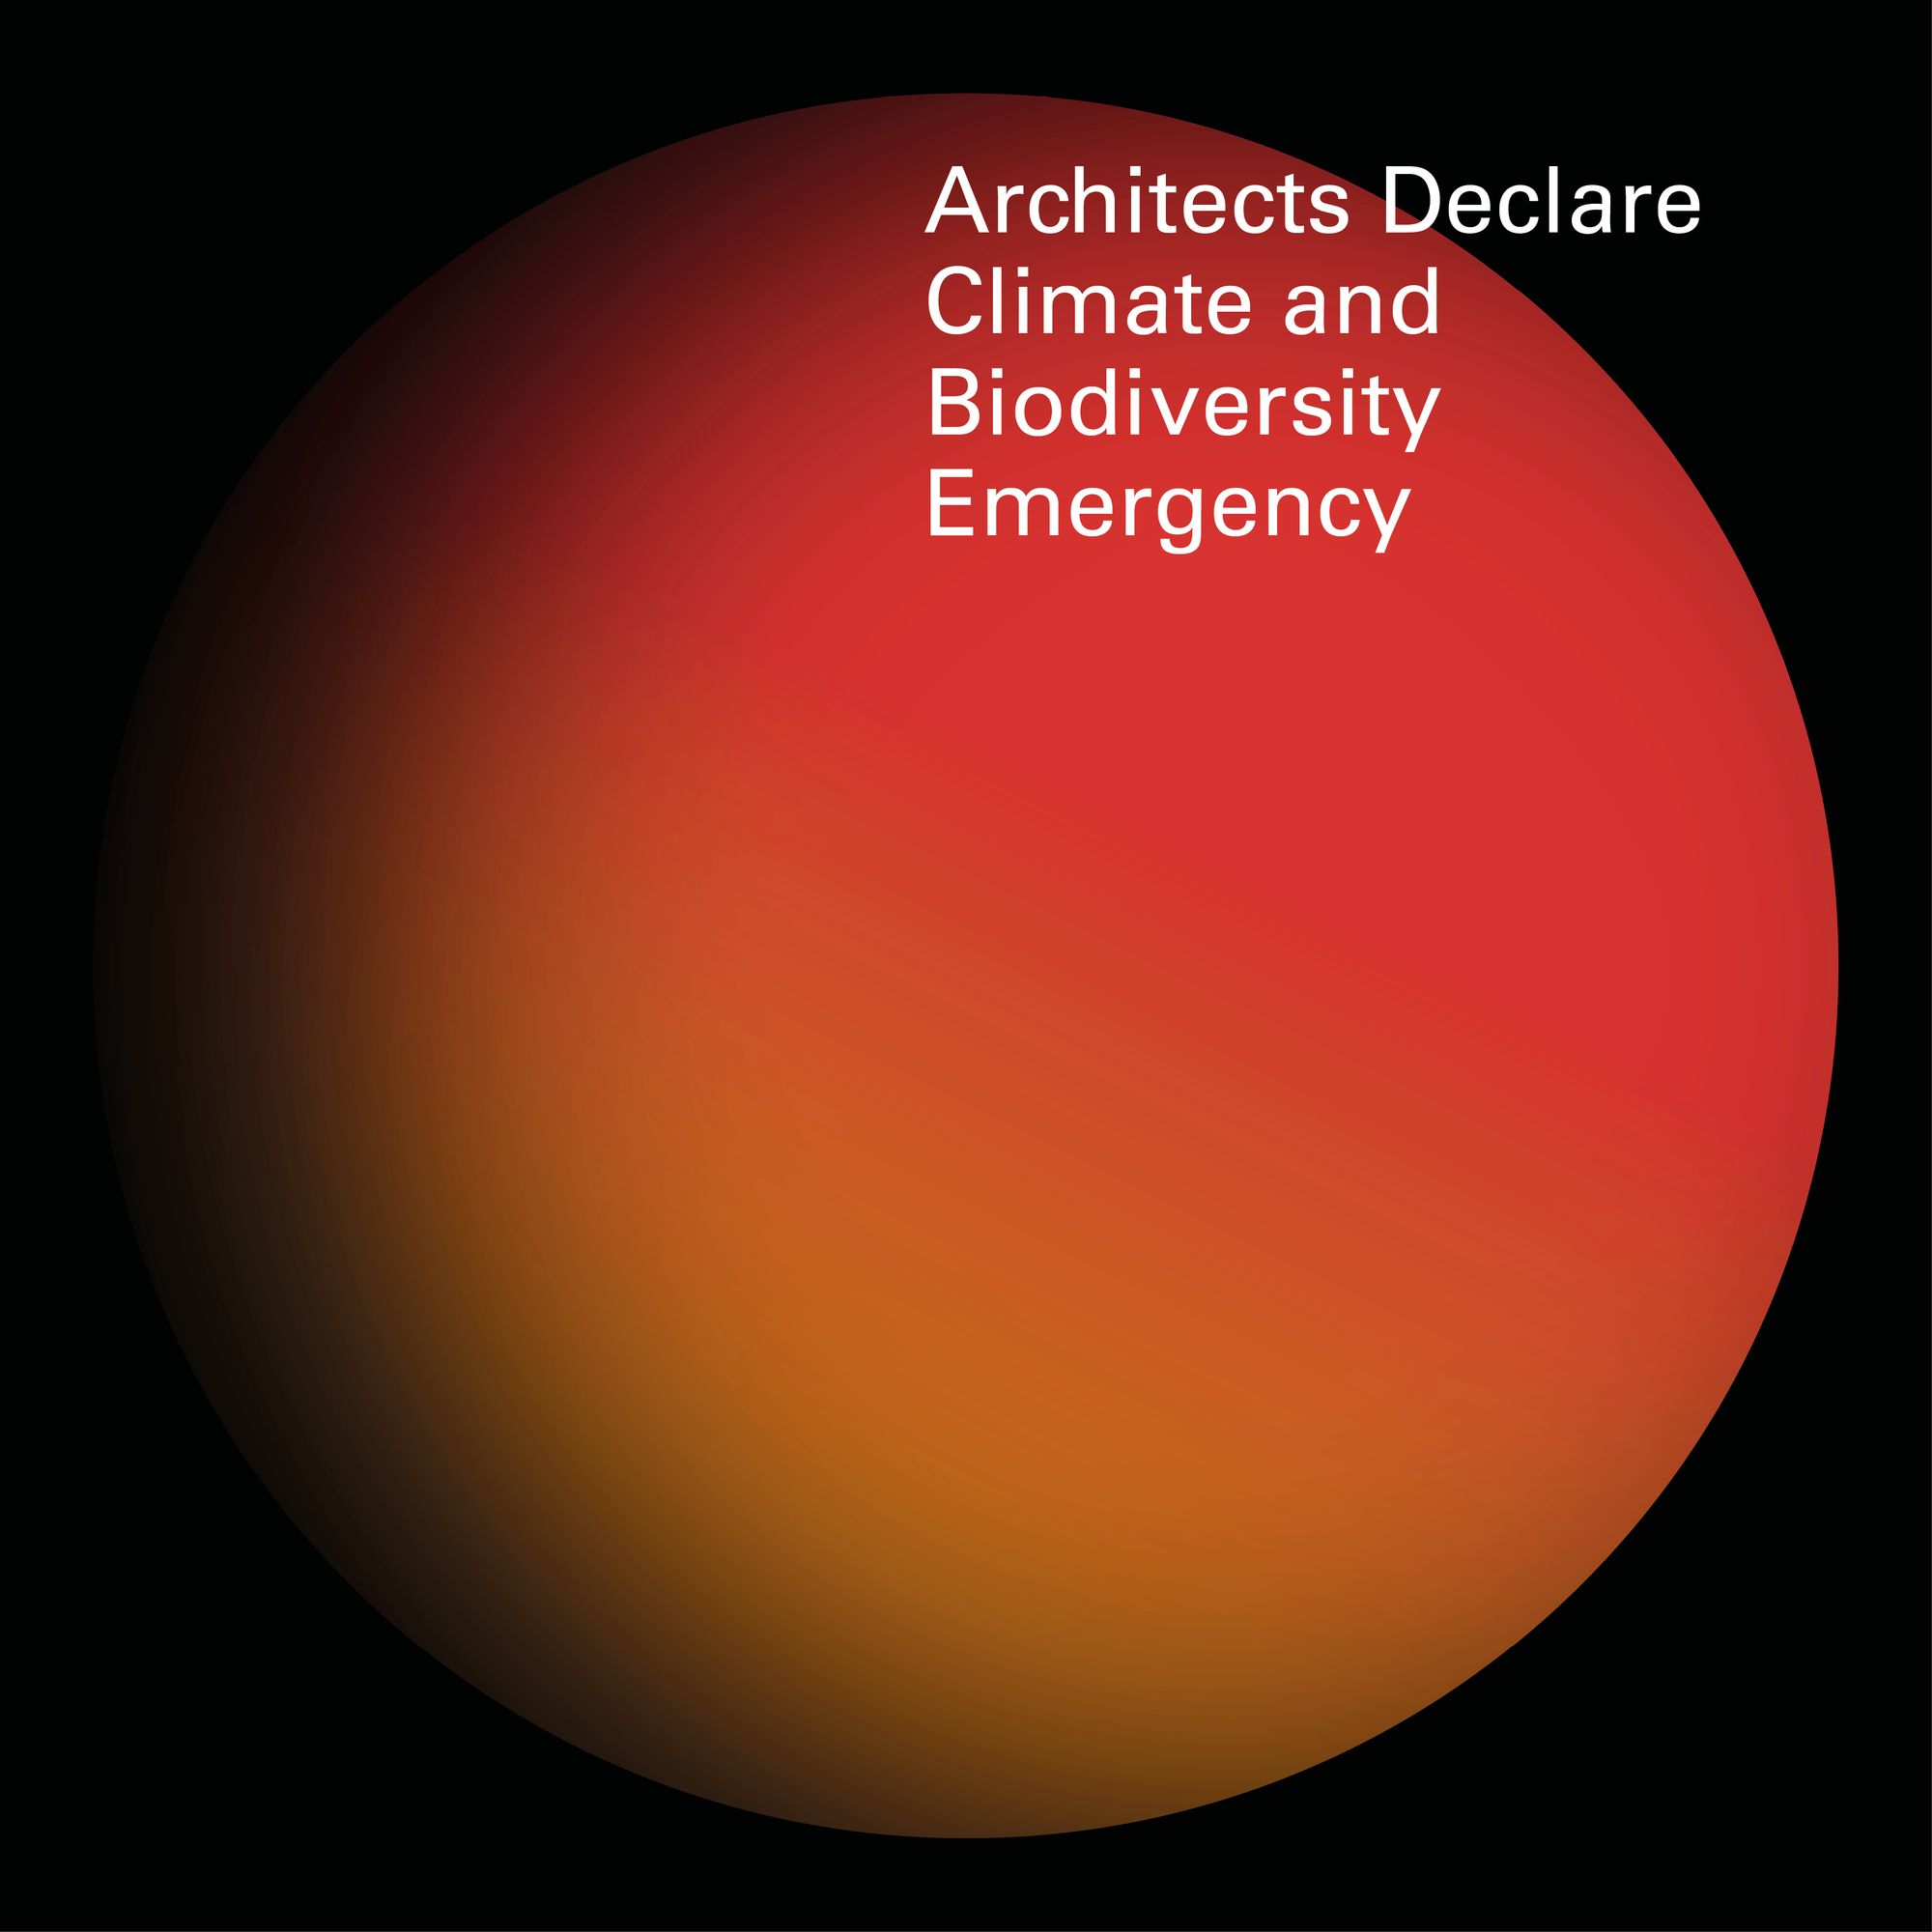 Since its launch in 2019, Architects Declare has spread to over 20 countries and 5,000 signatories.